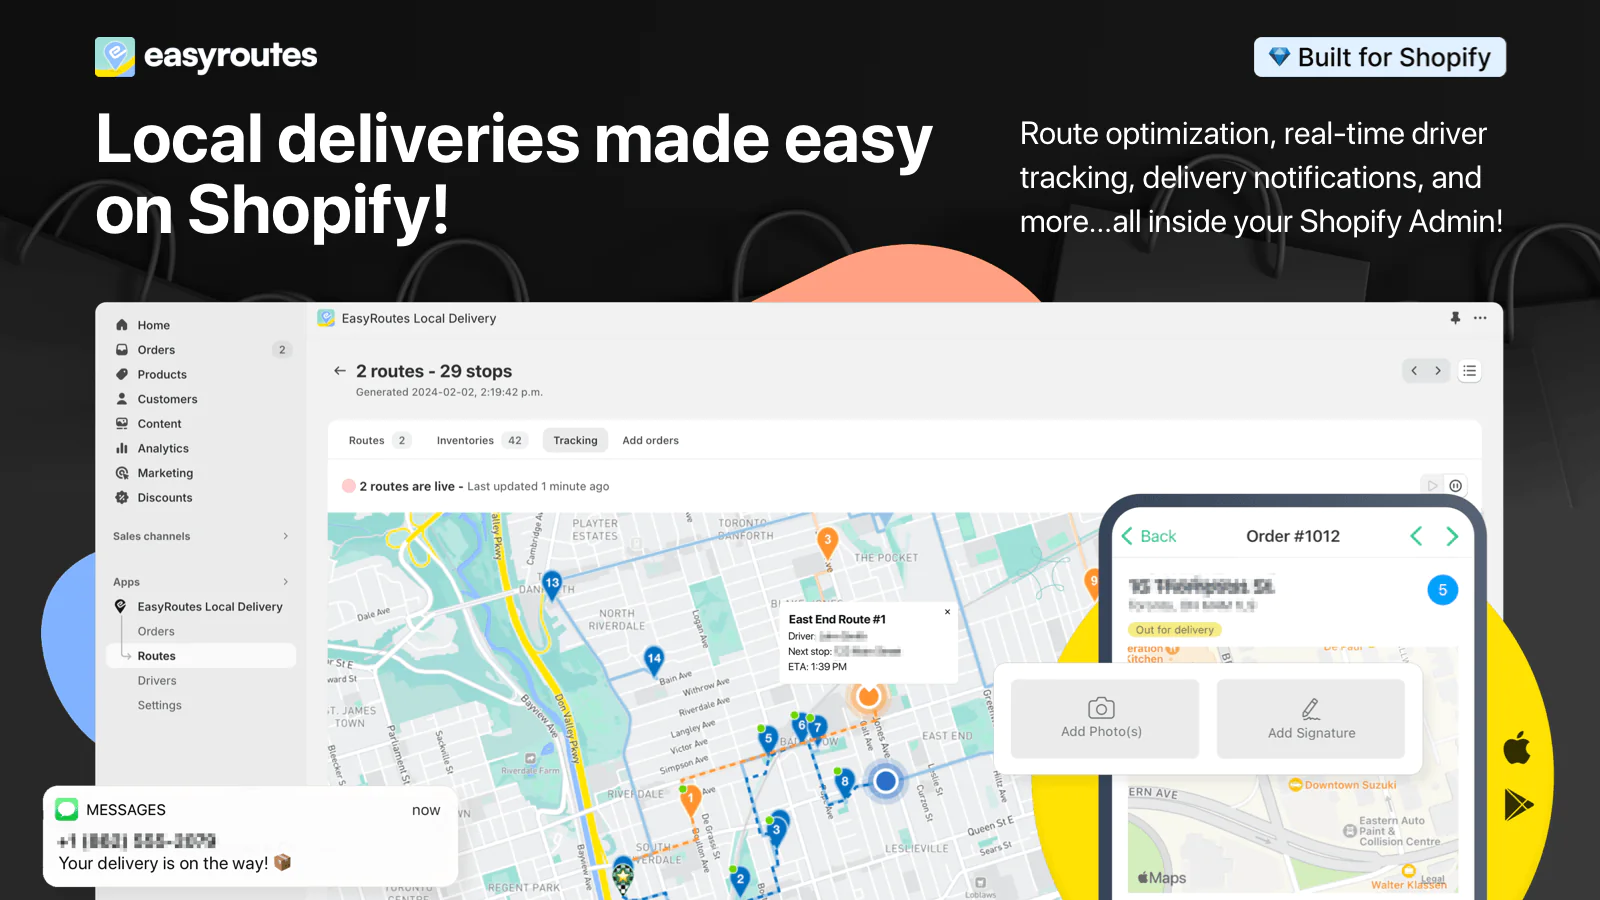 EasyRoutes Local deliveries made easy on Shopify